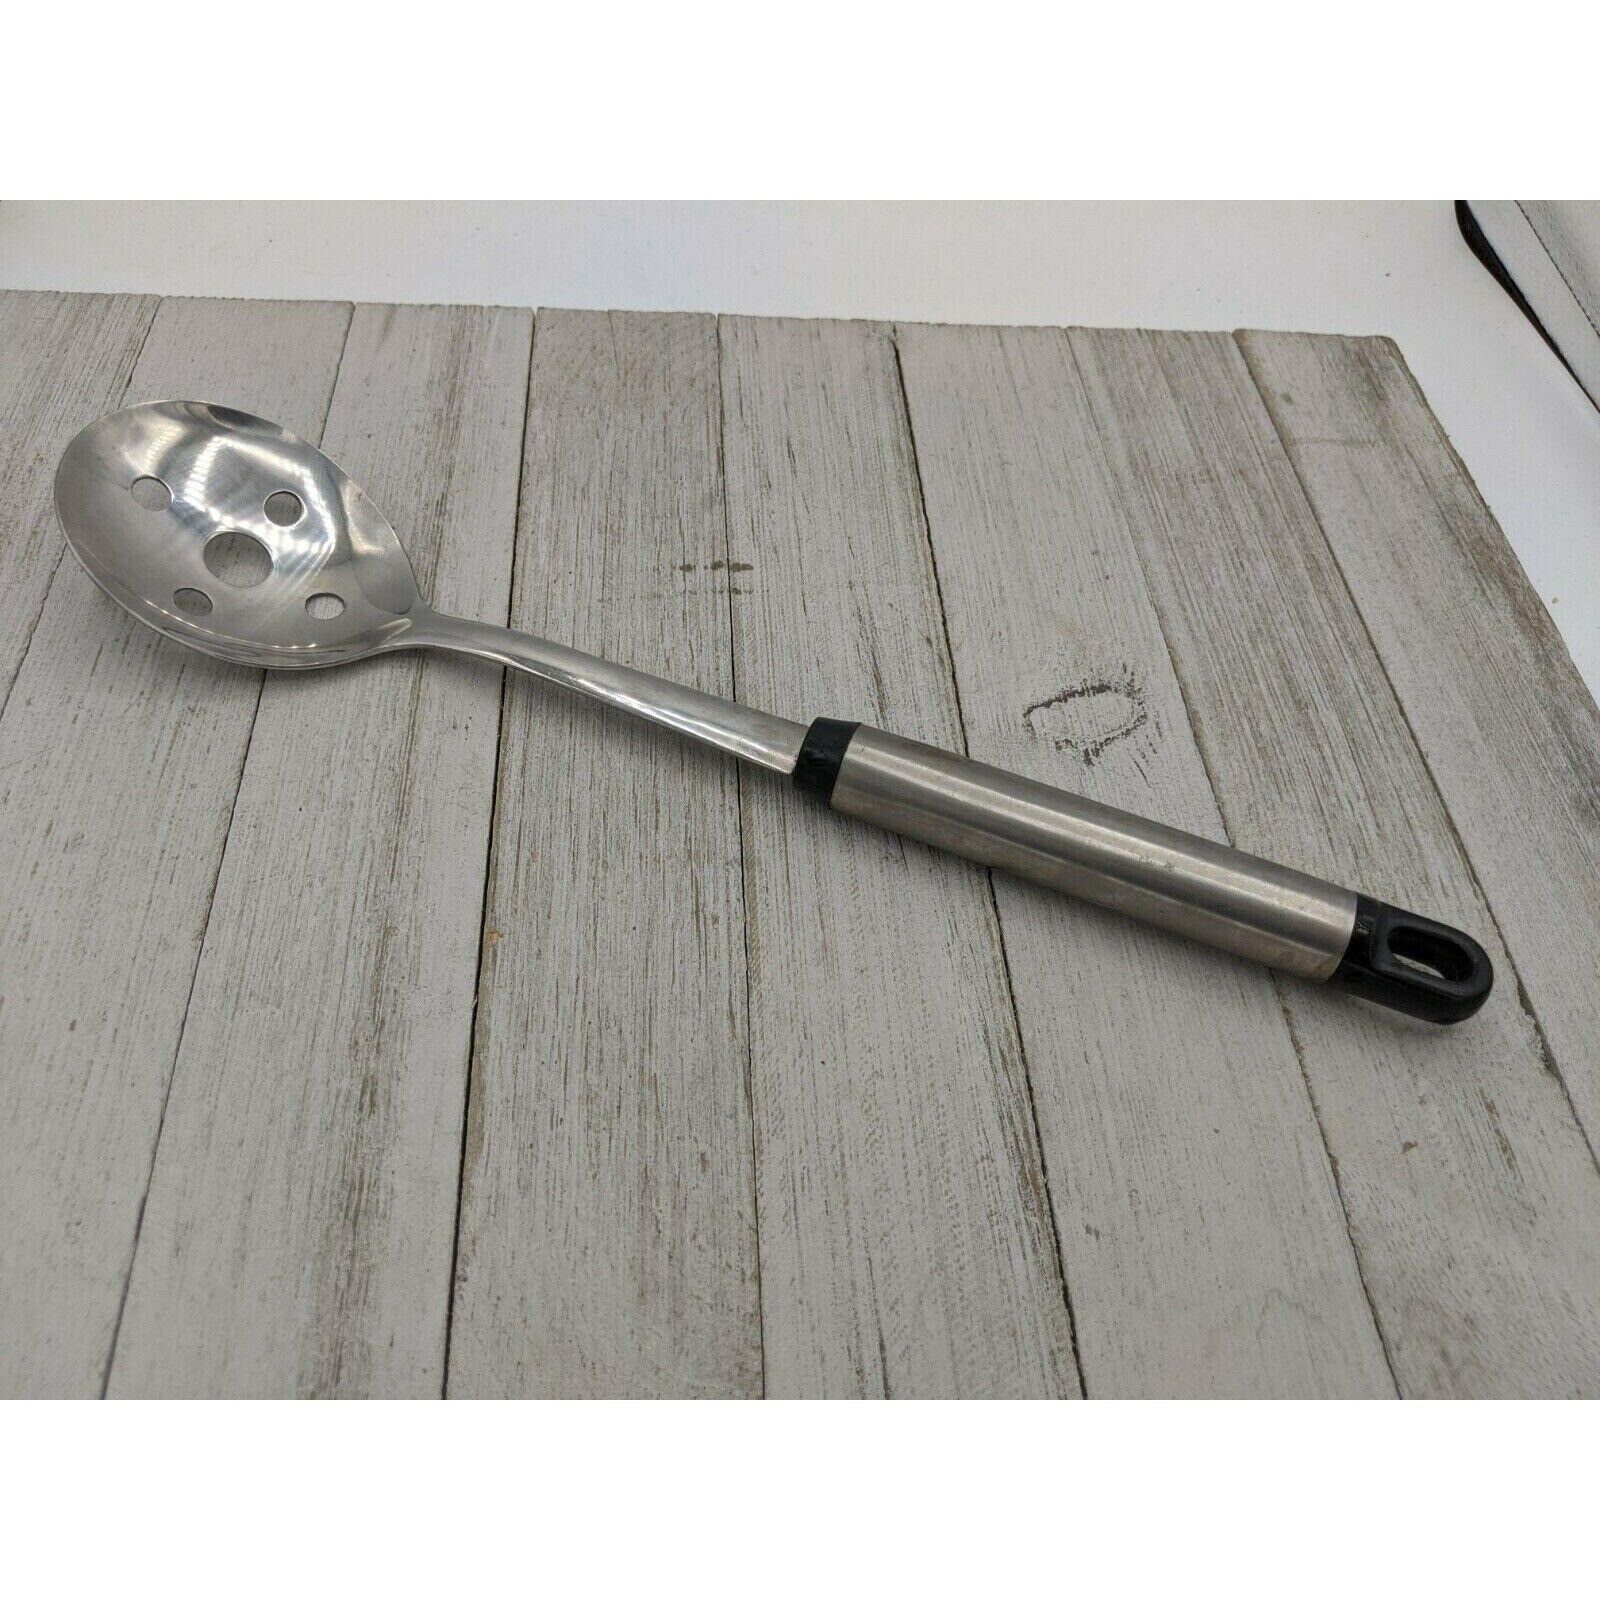 Primary image for Ultrex Stainless Steel 18/10 Slotted Spoon 12"